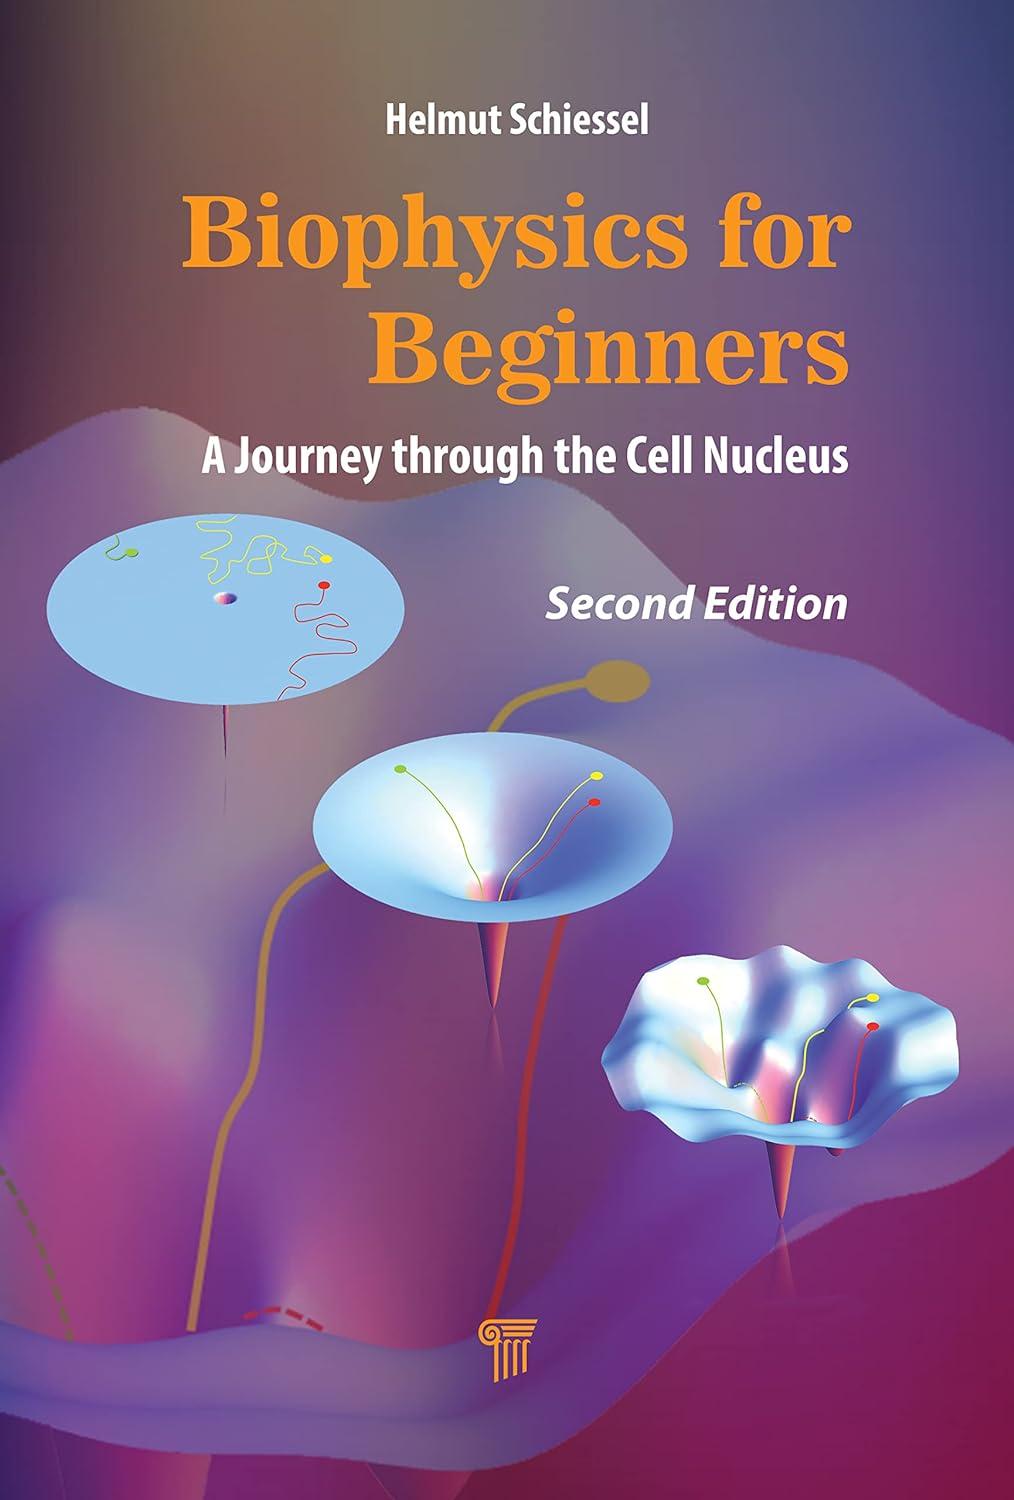 biophysics for beginners a journey through the cell nucleus 2nd edition helmut schiessel 9814877808,